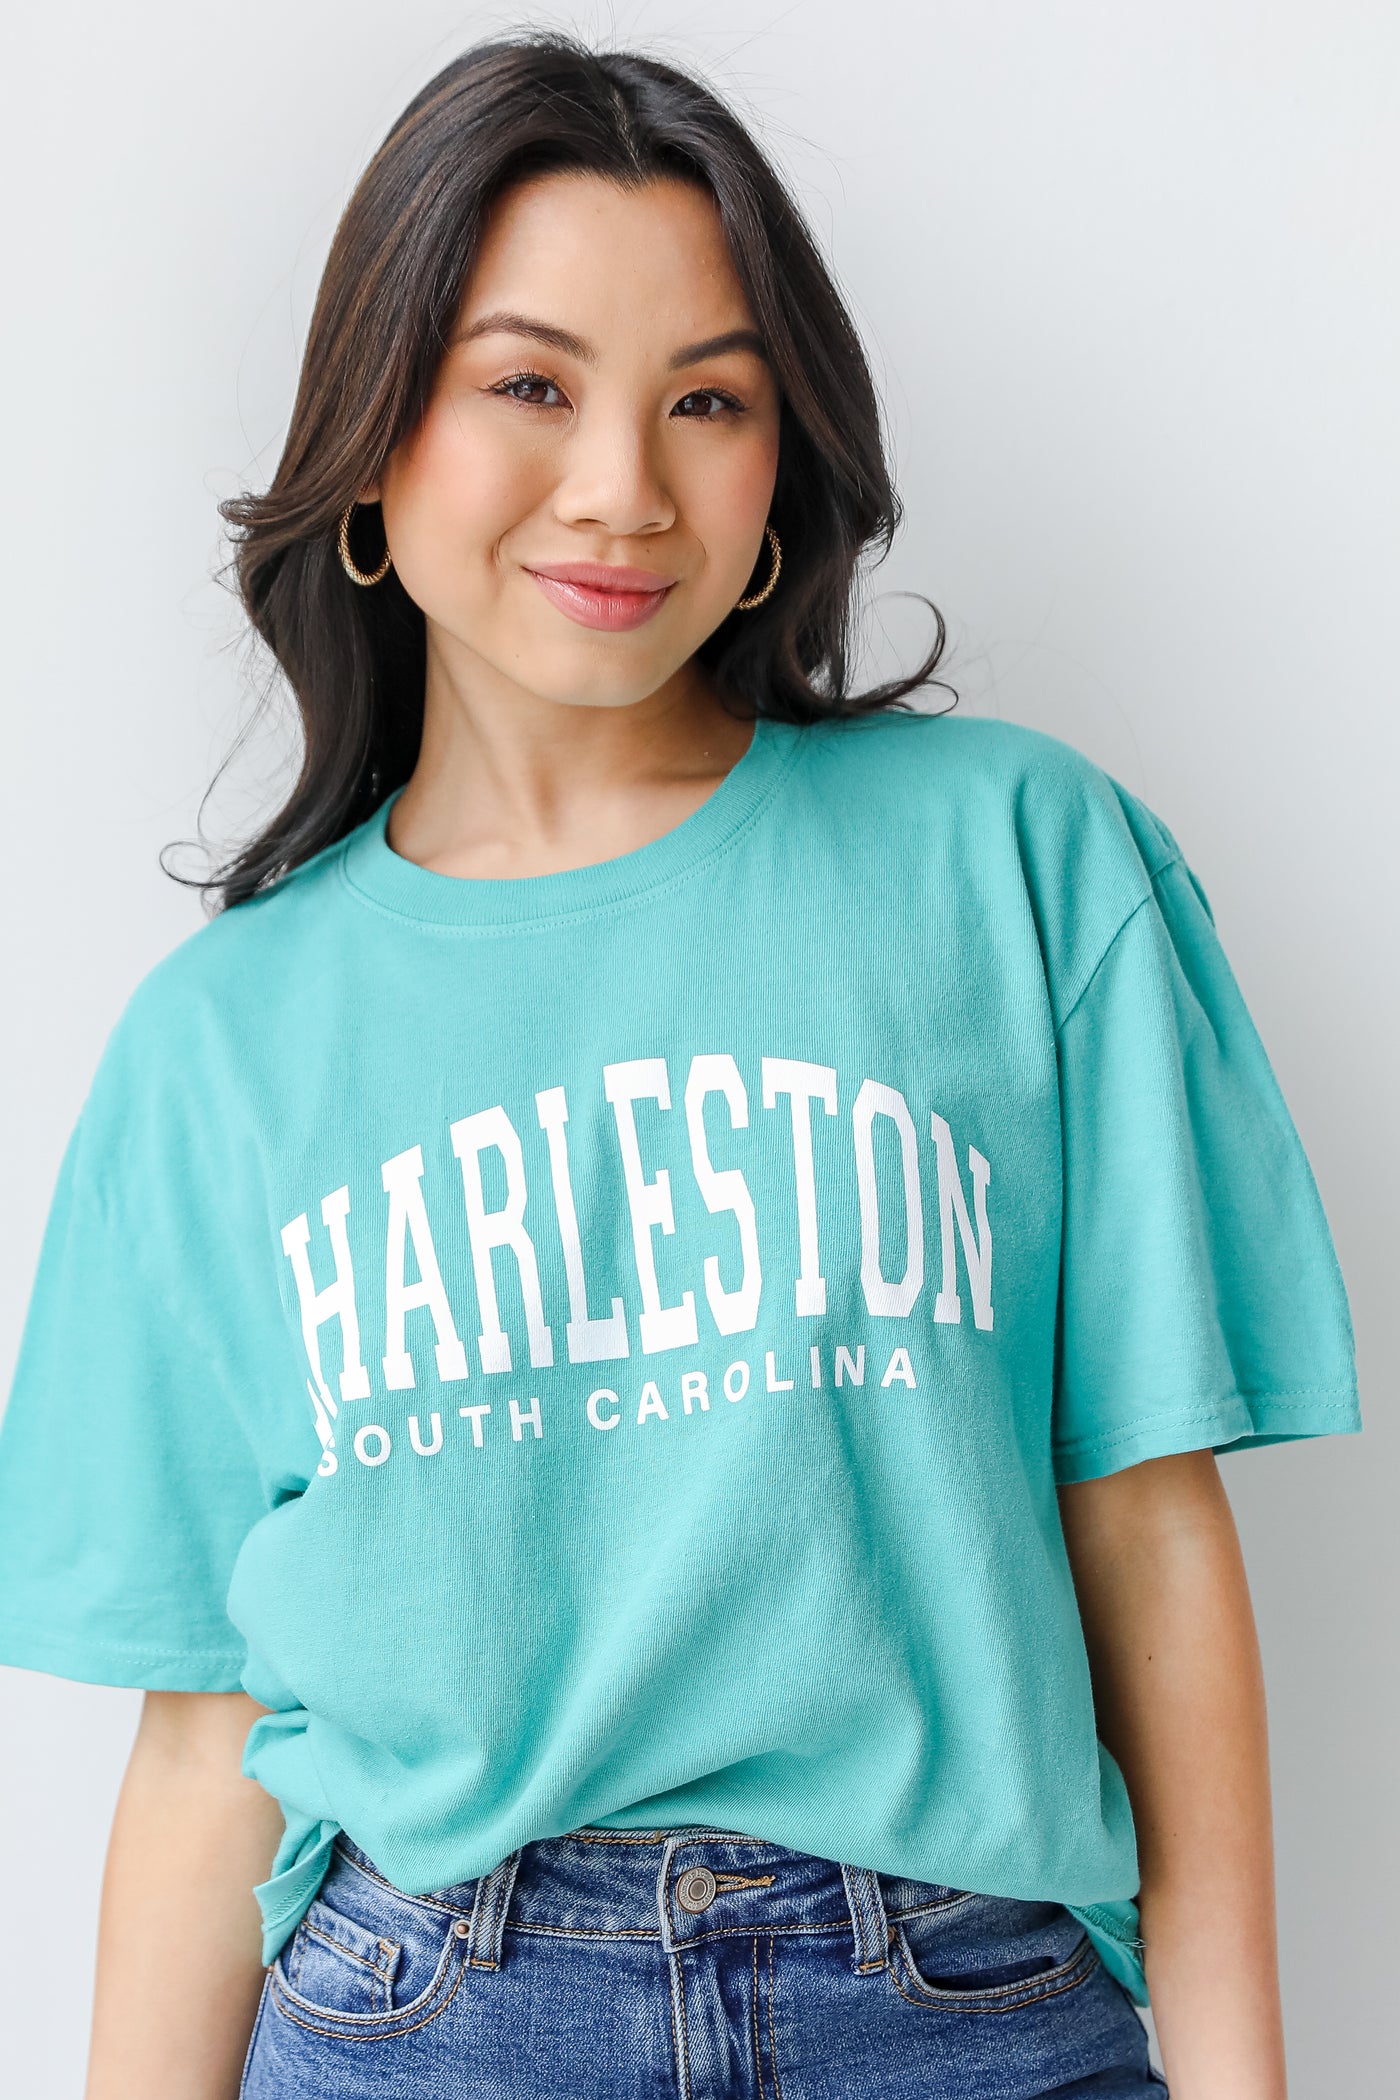 Teal Charleston Tee from dress up